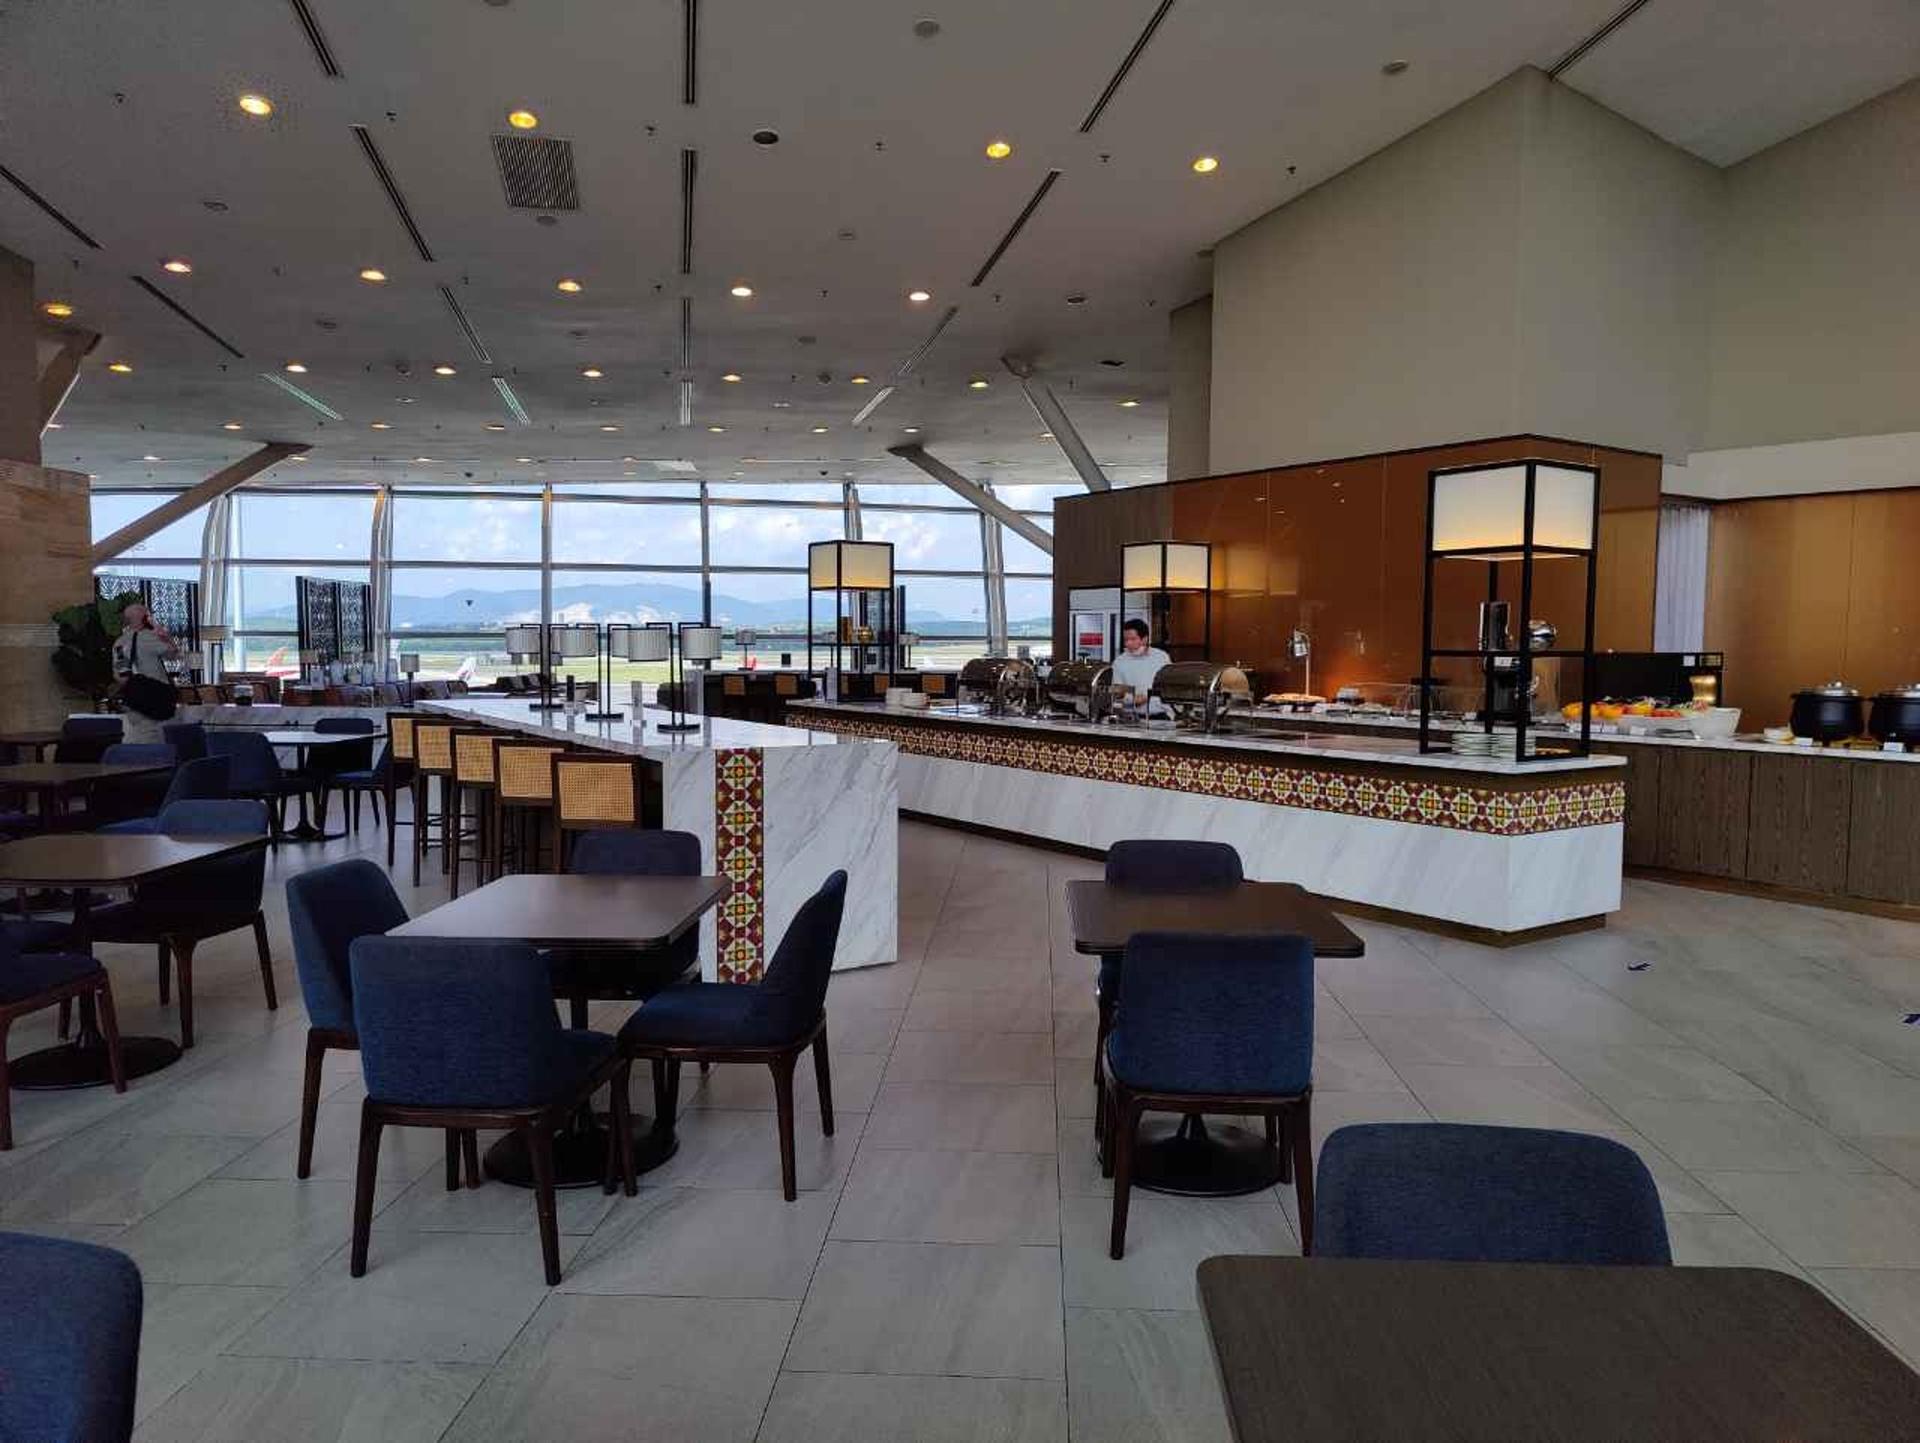 Malaysia Airlines Golden Lounge (Regional) image 13 of 13